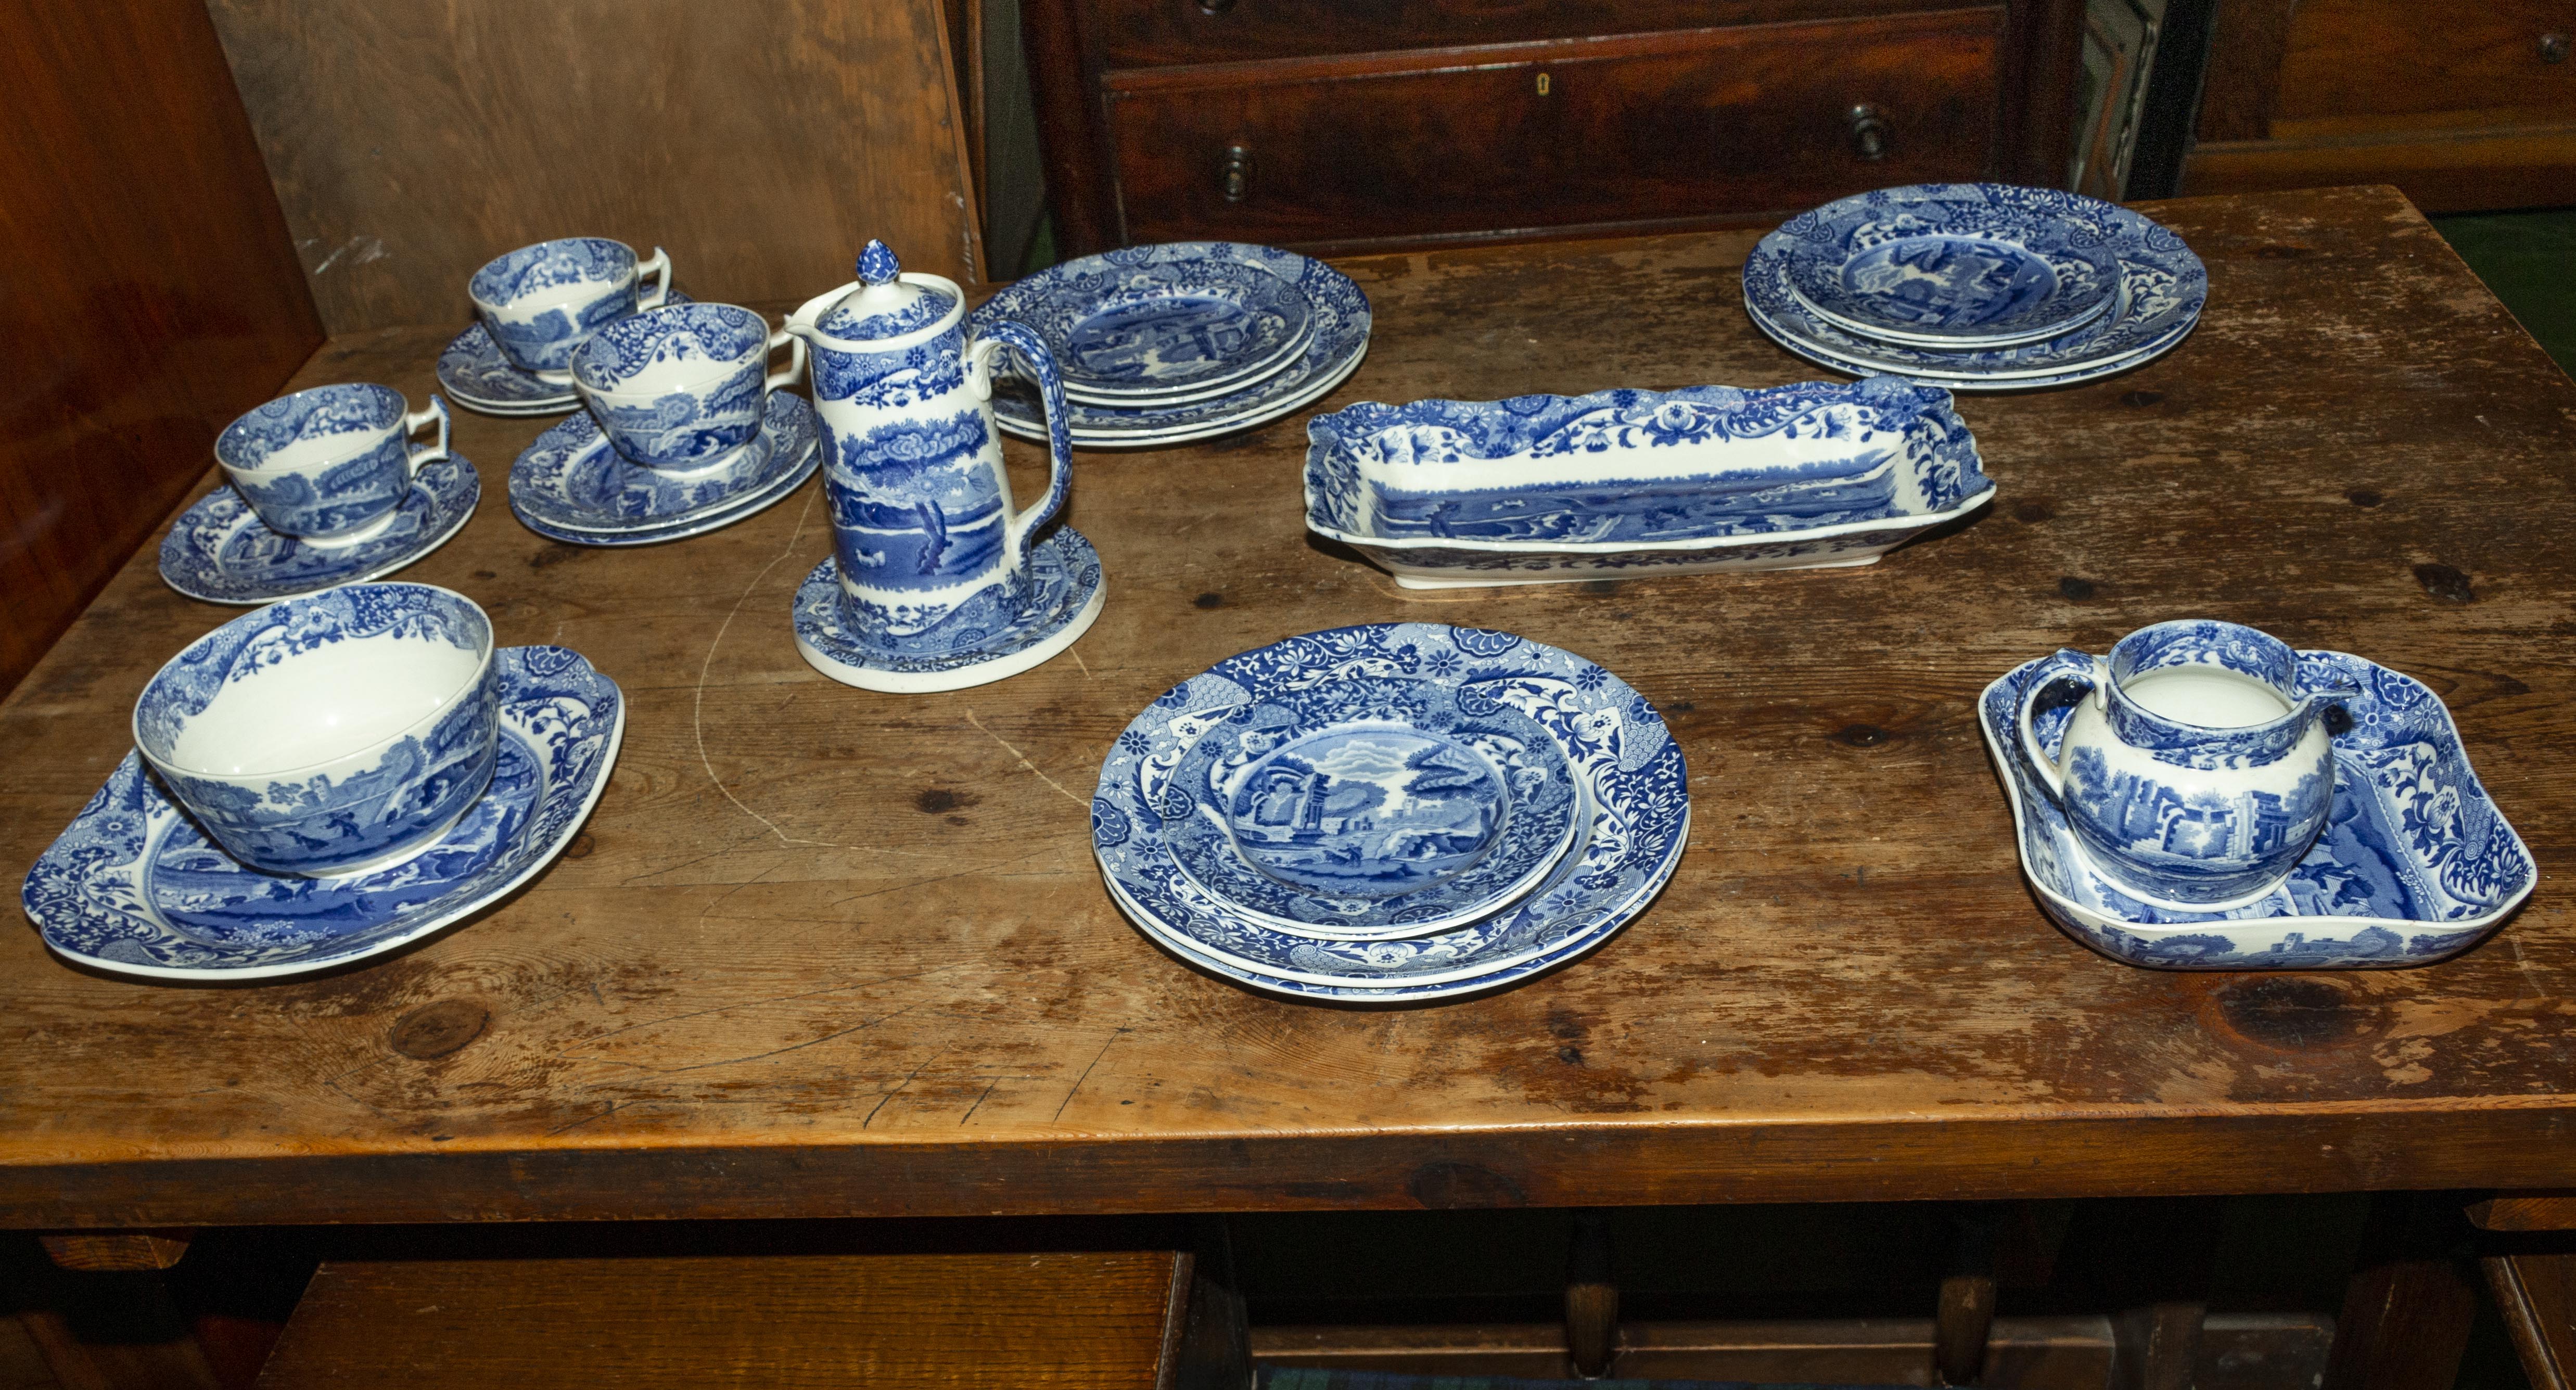 A collection of blue and white transfer printed table ware